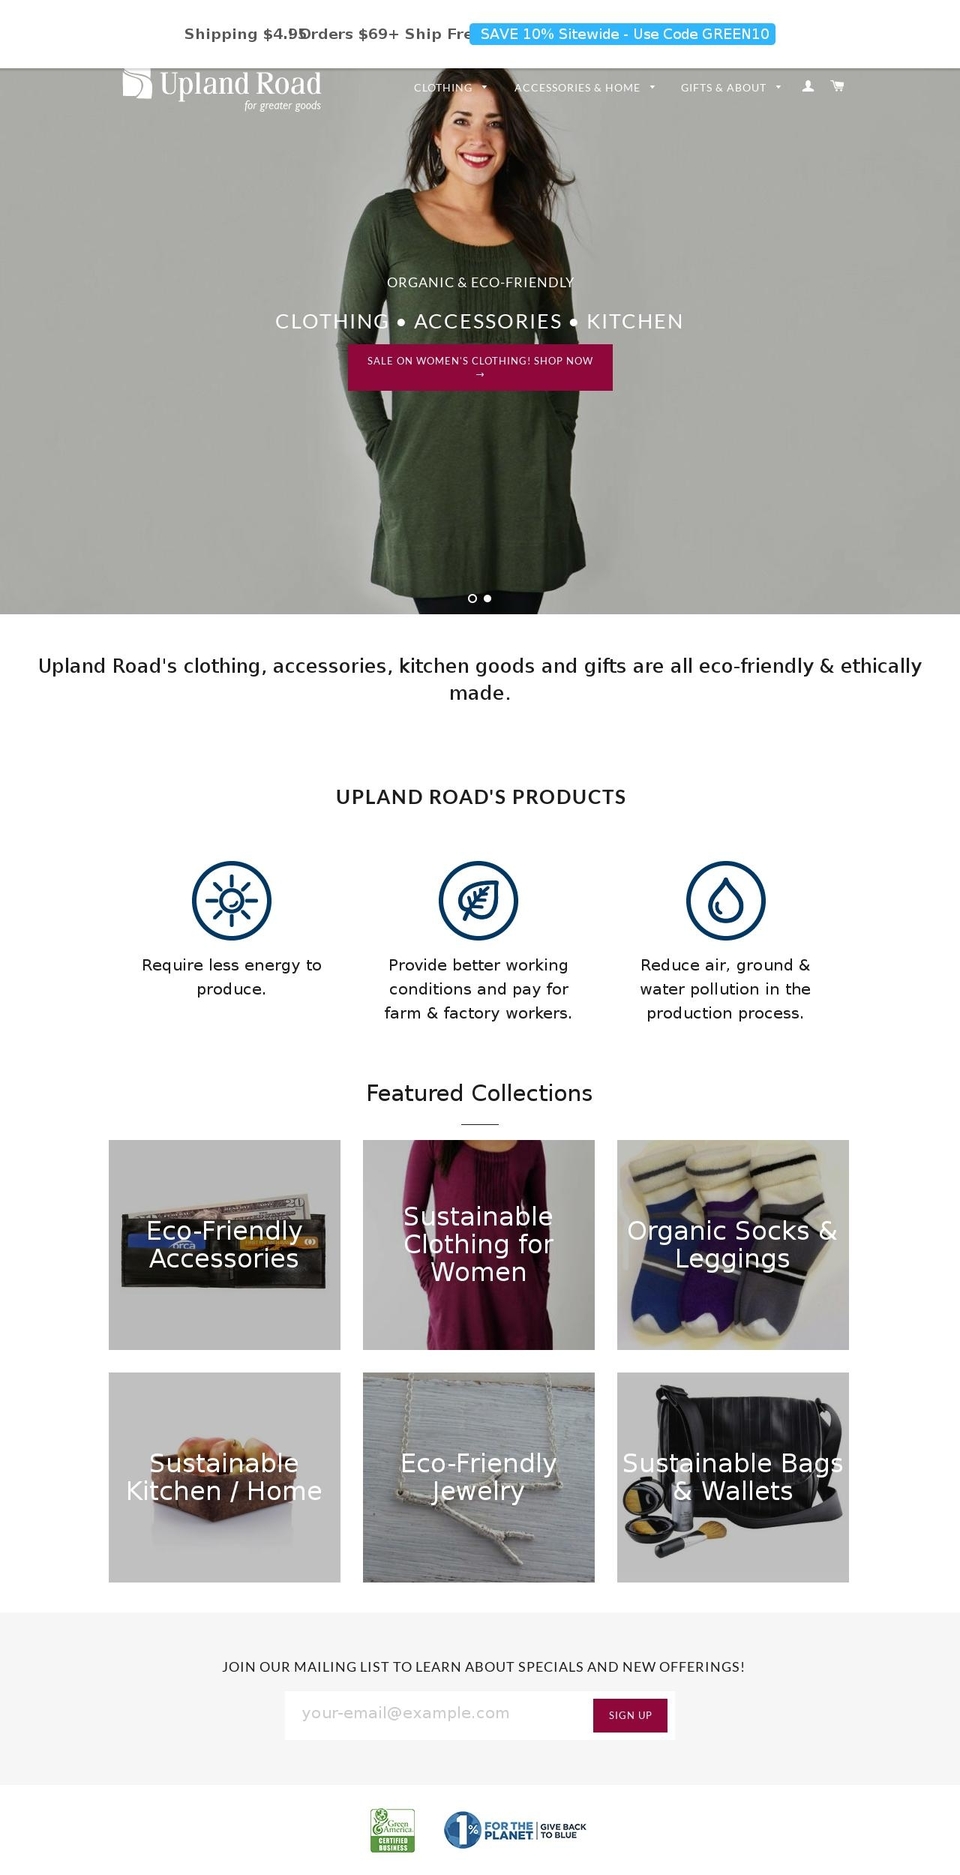 Brooklyn Shopify theme site example uplandroad.myshopify.com